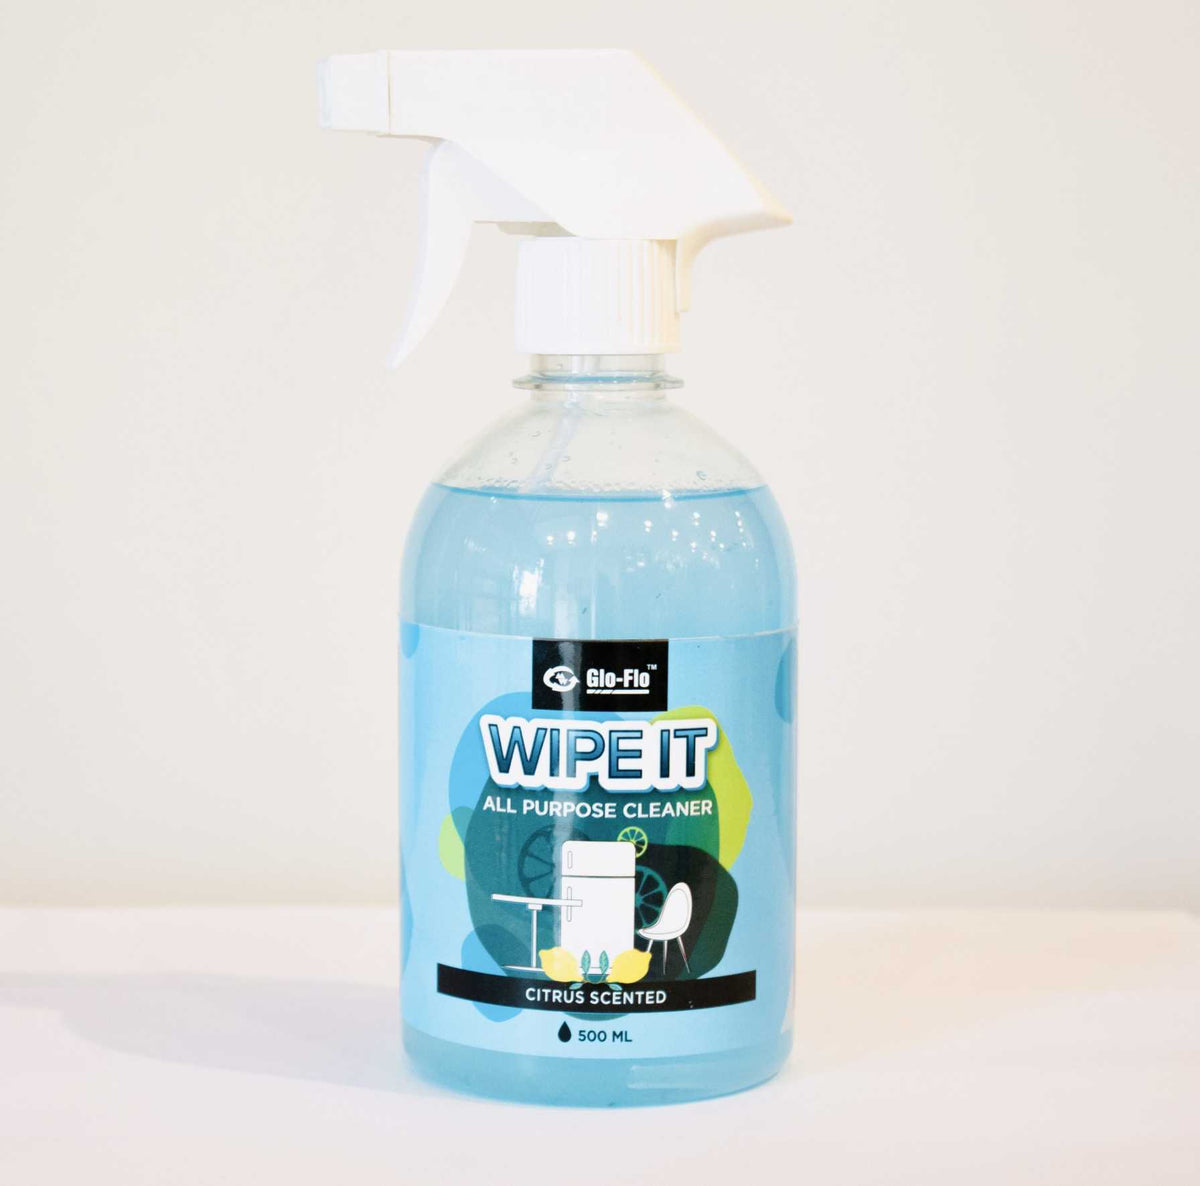 Wipe it (All Purpose Cleaner)